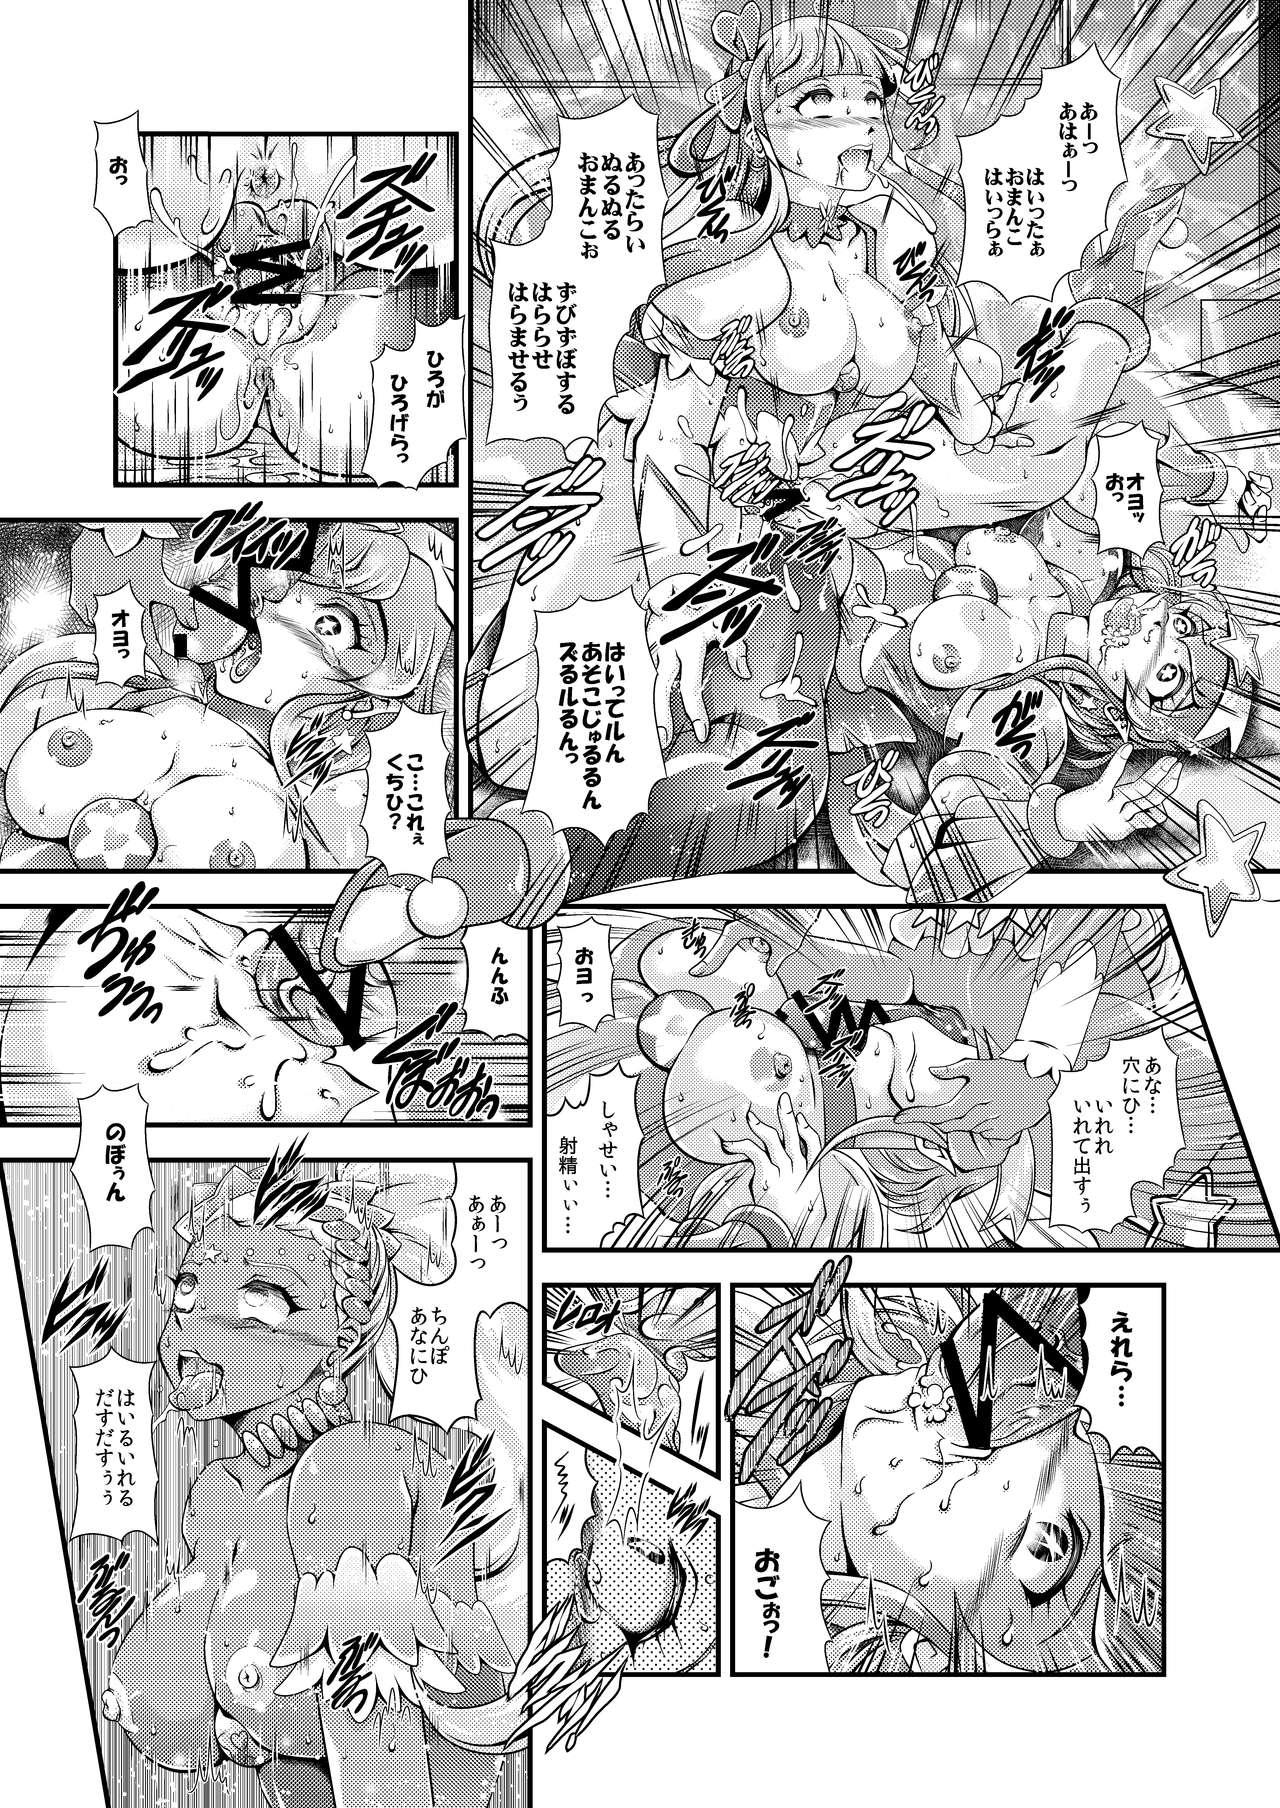 Gostosas Greatest Eclipse ~ OVER the RAINBOW + Omake File - Star twinkle precure Dutch - Page 14